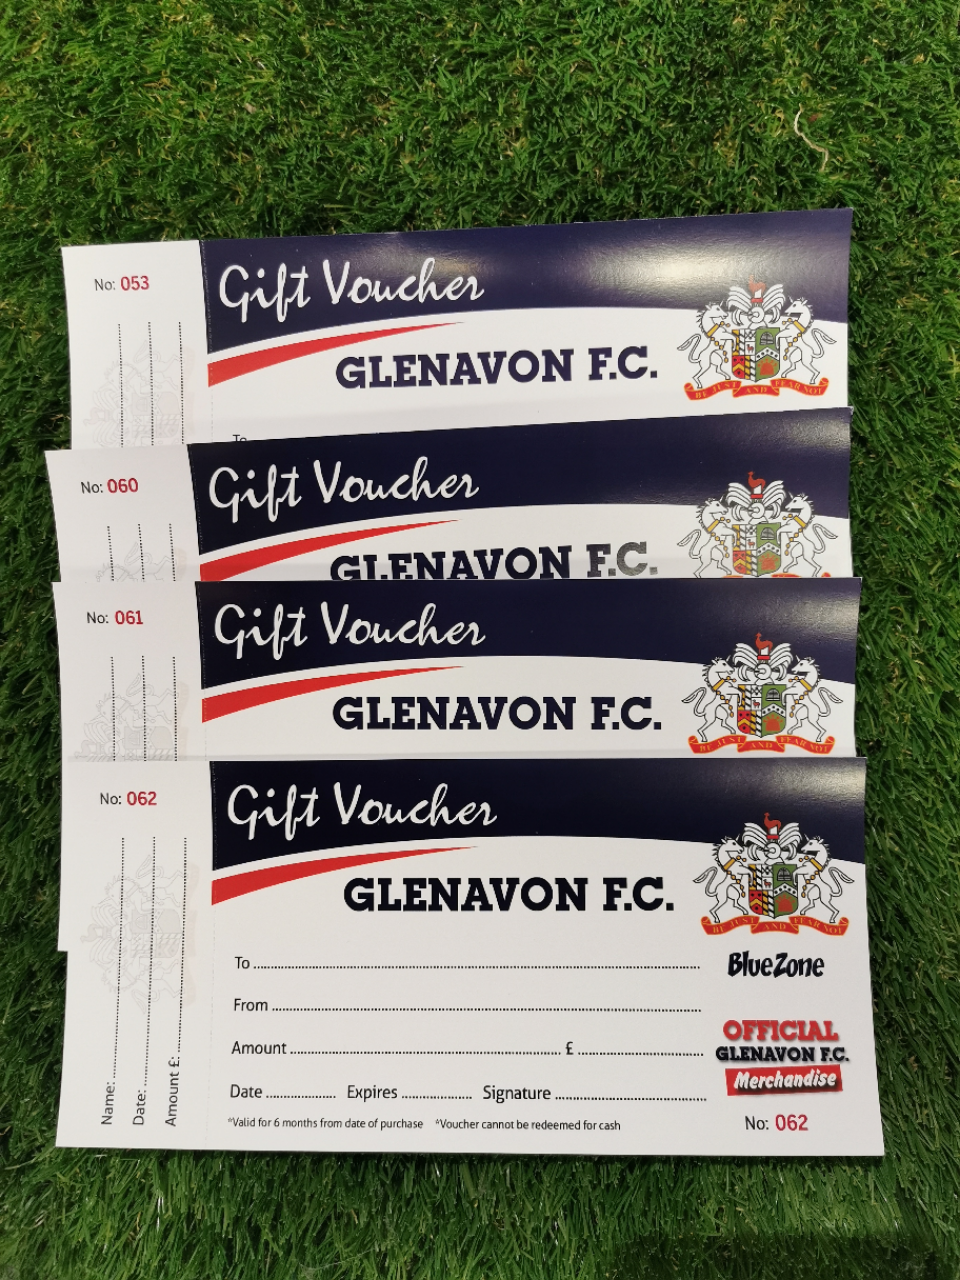 Bluezone Online - Official Store of Glenavon Football Club – The BlueZone Club  Shop